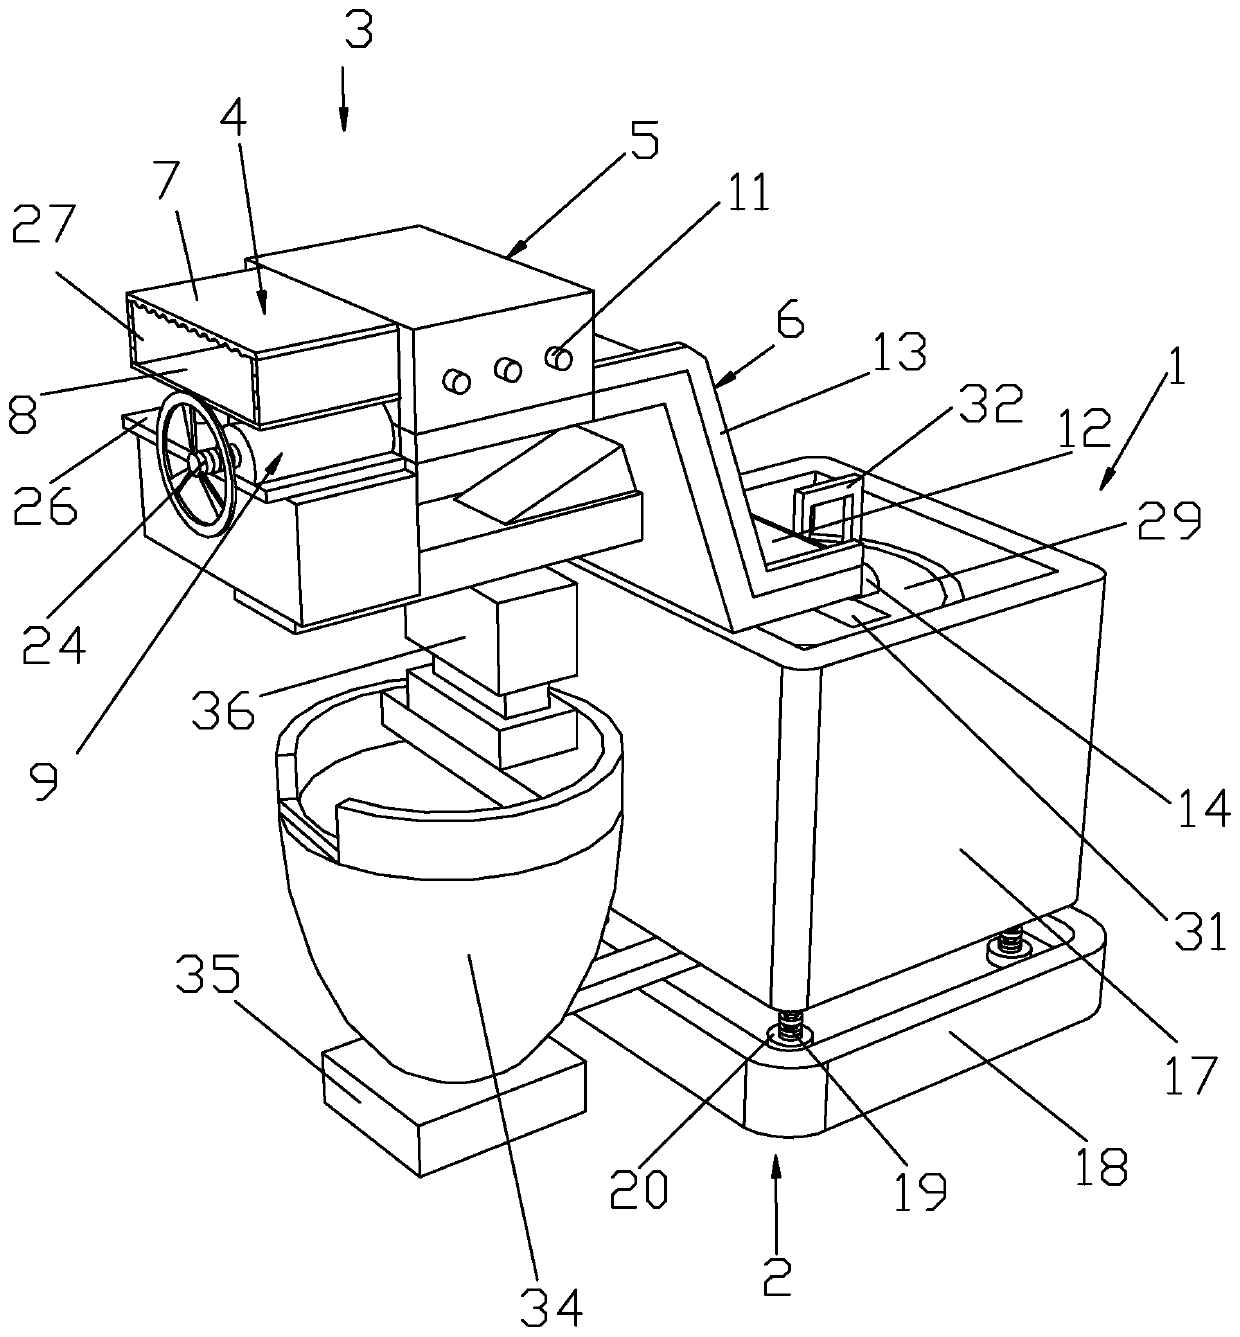 A packaging cardboard regeneration beating device